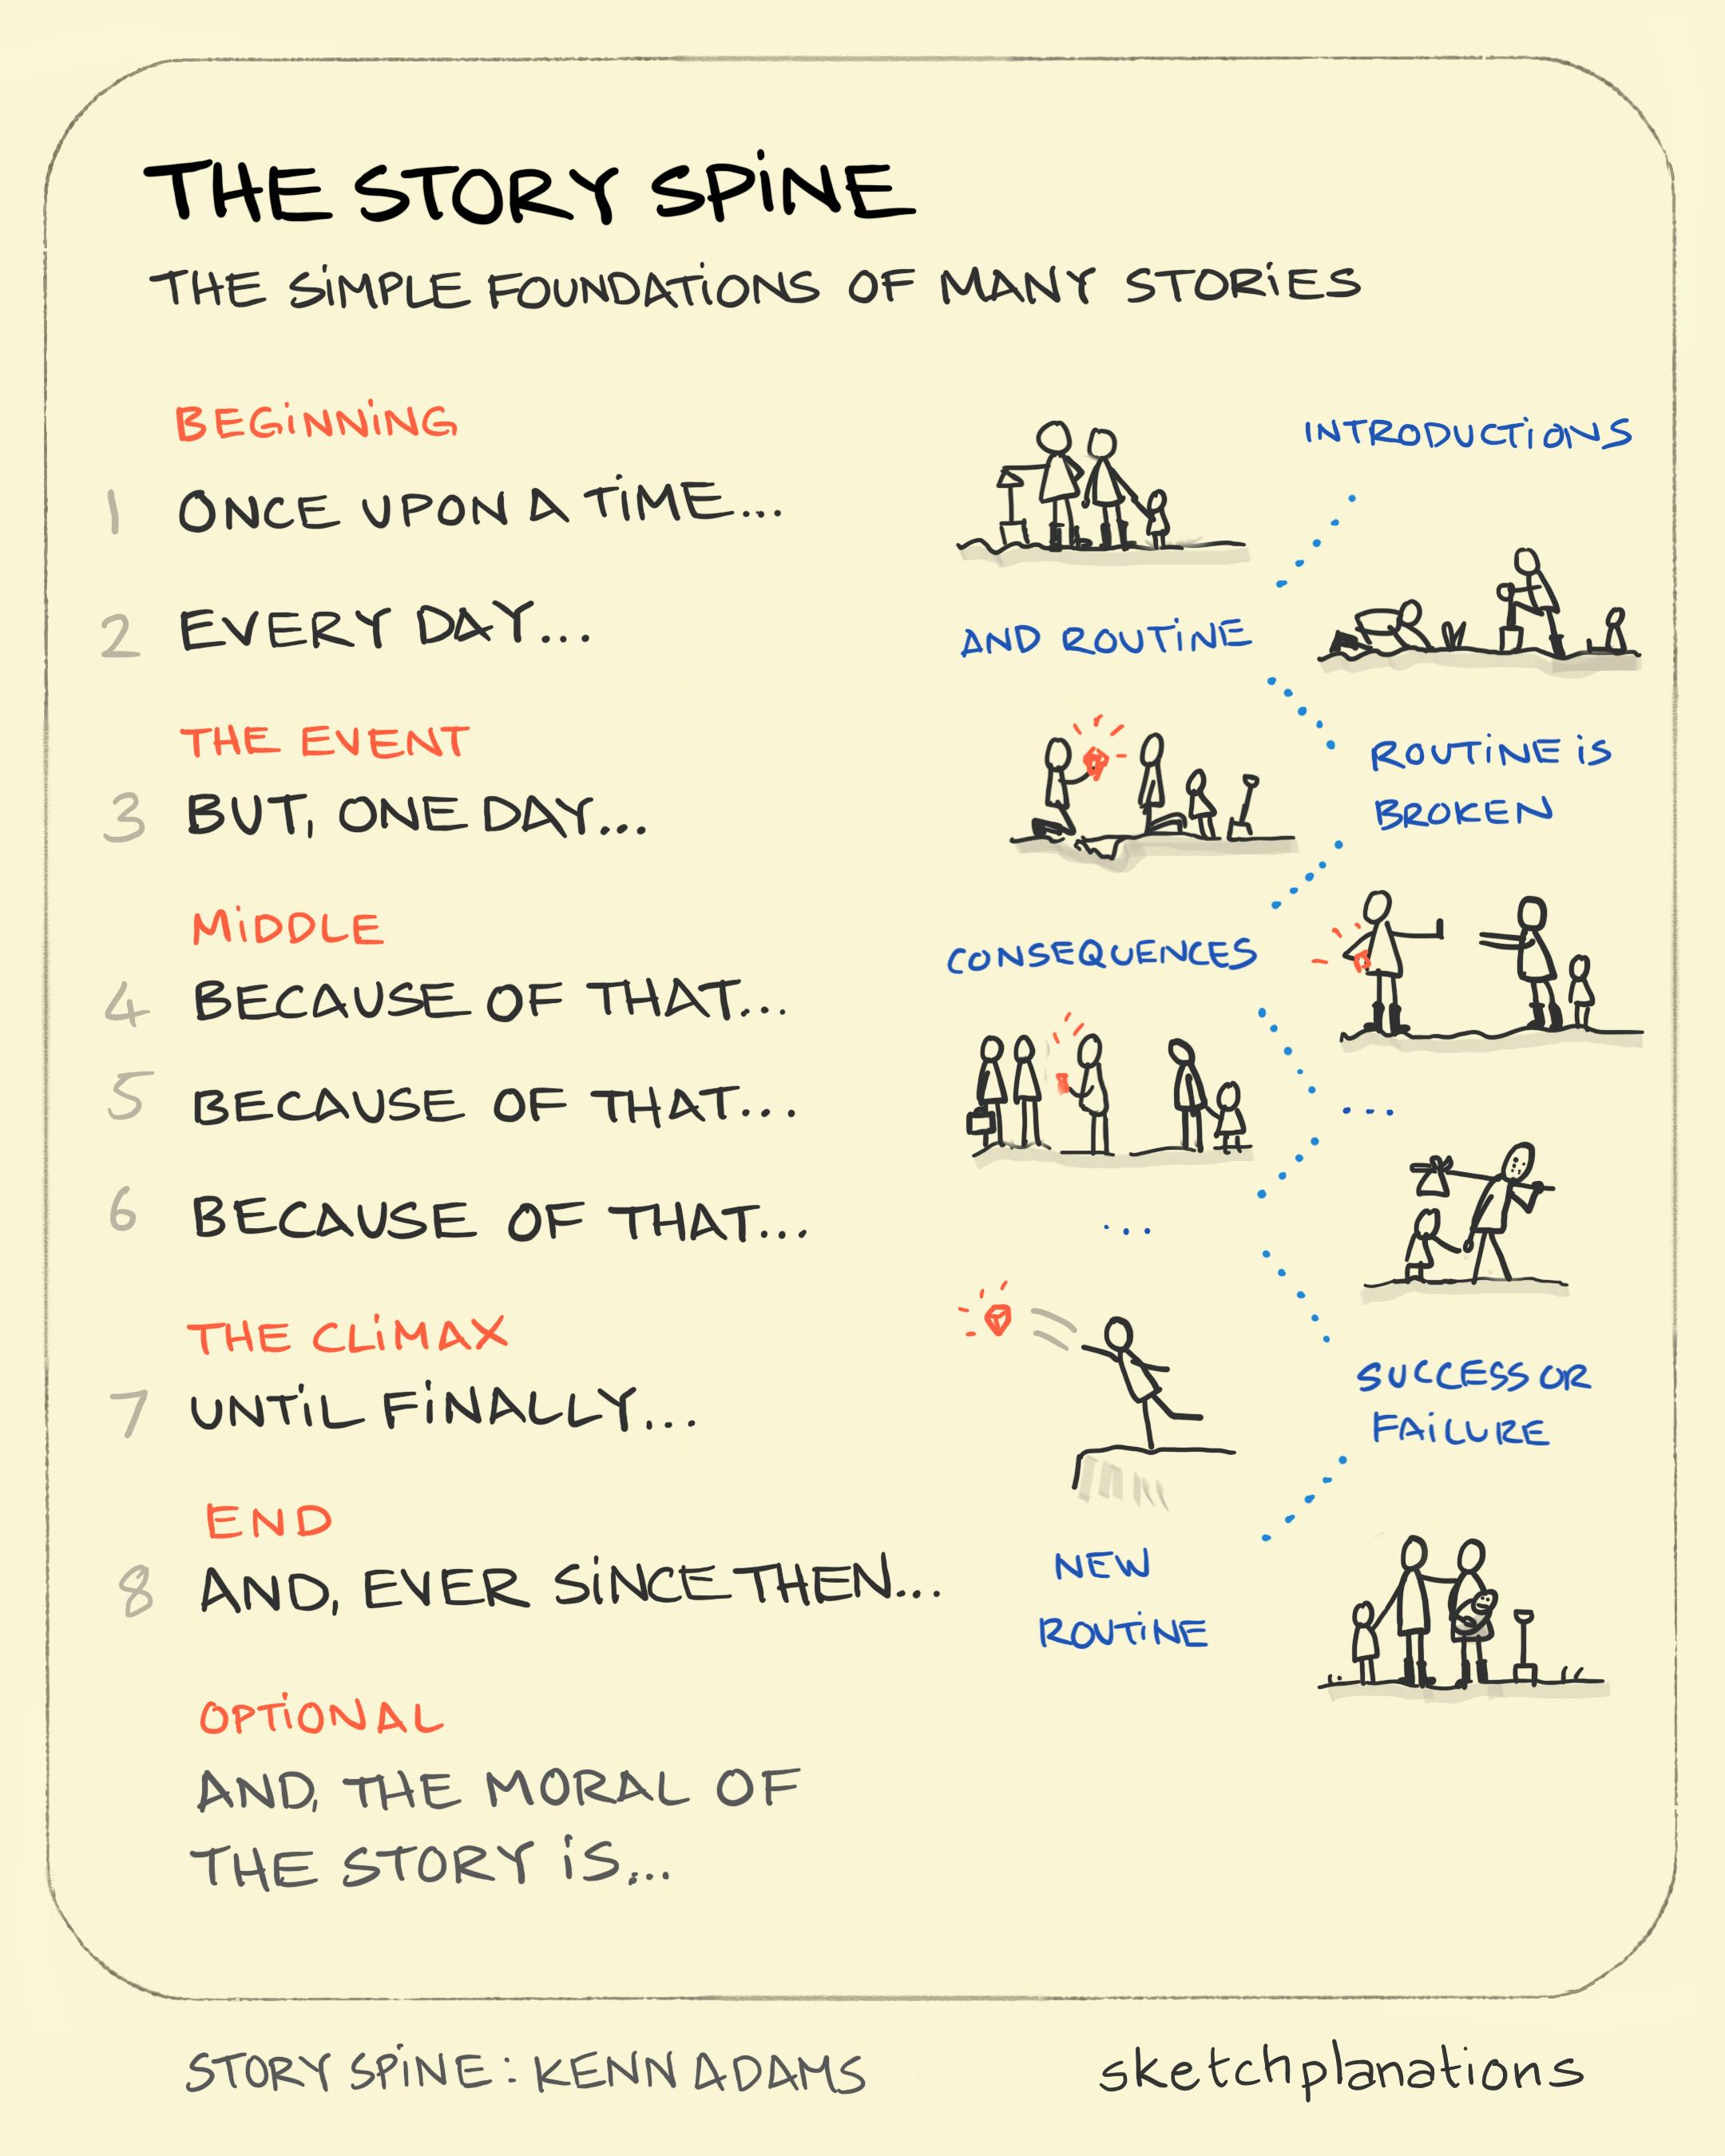 The story spine: illustrating a common pattern of storytelling with a small vignette of people alongside the steps